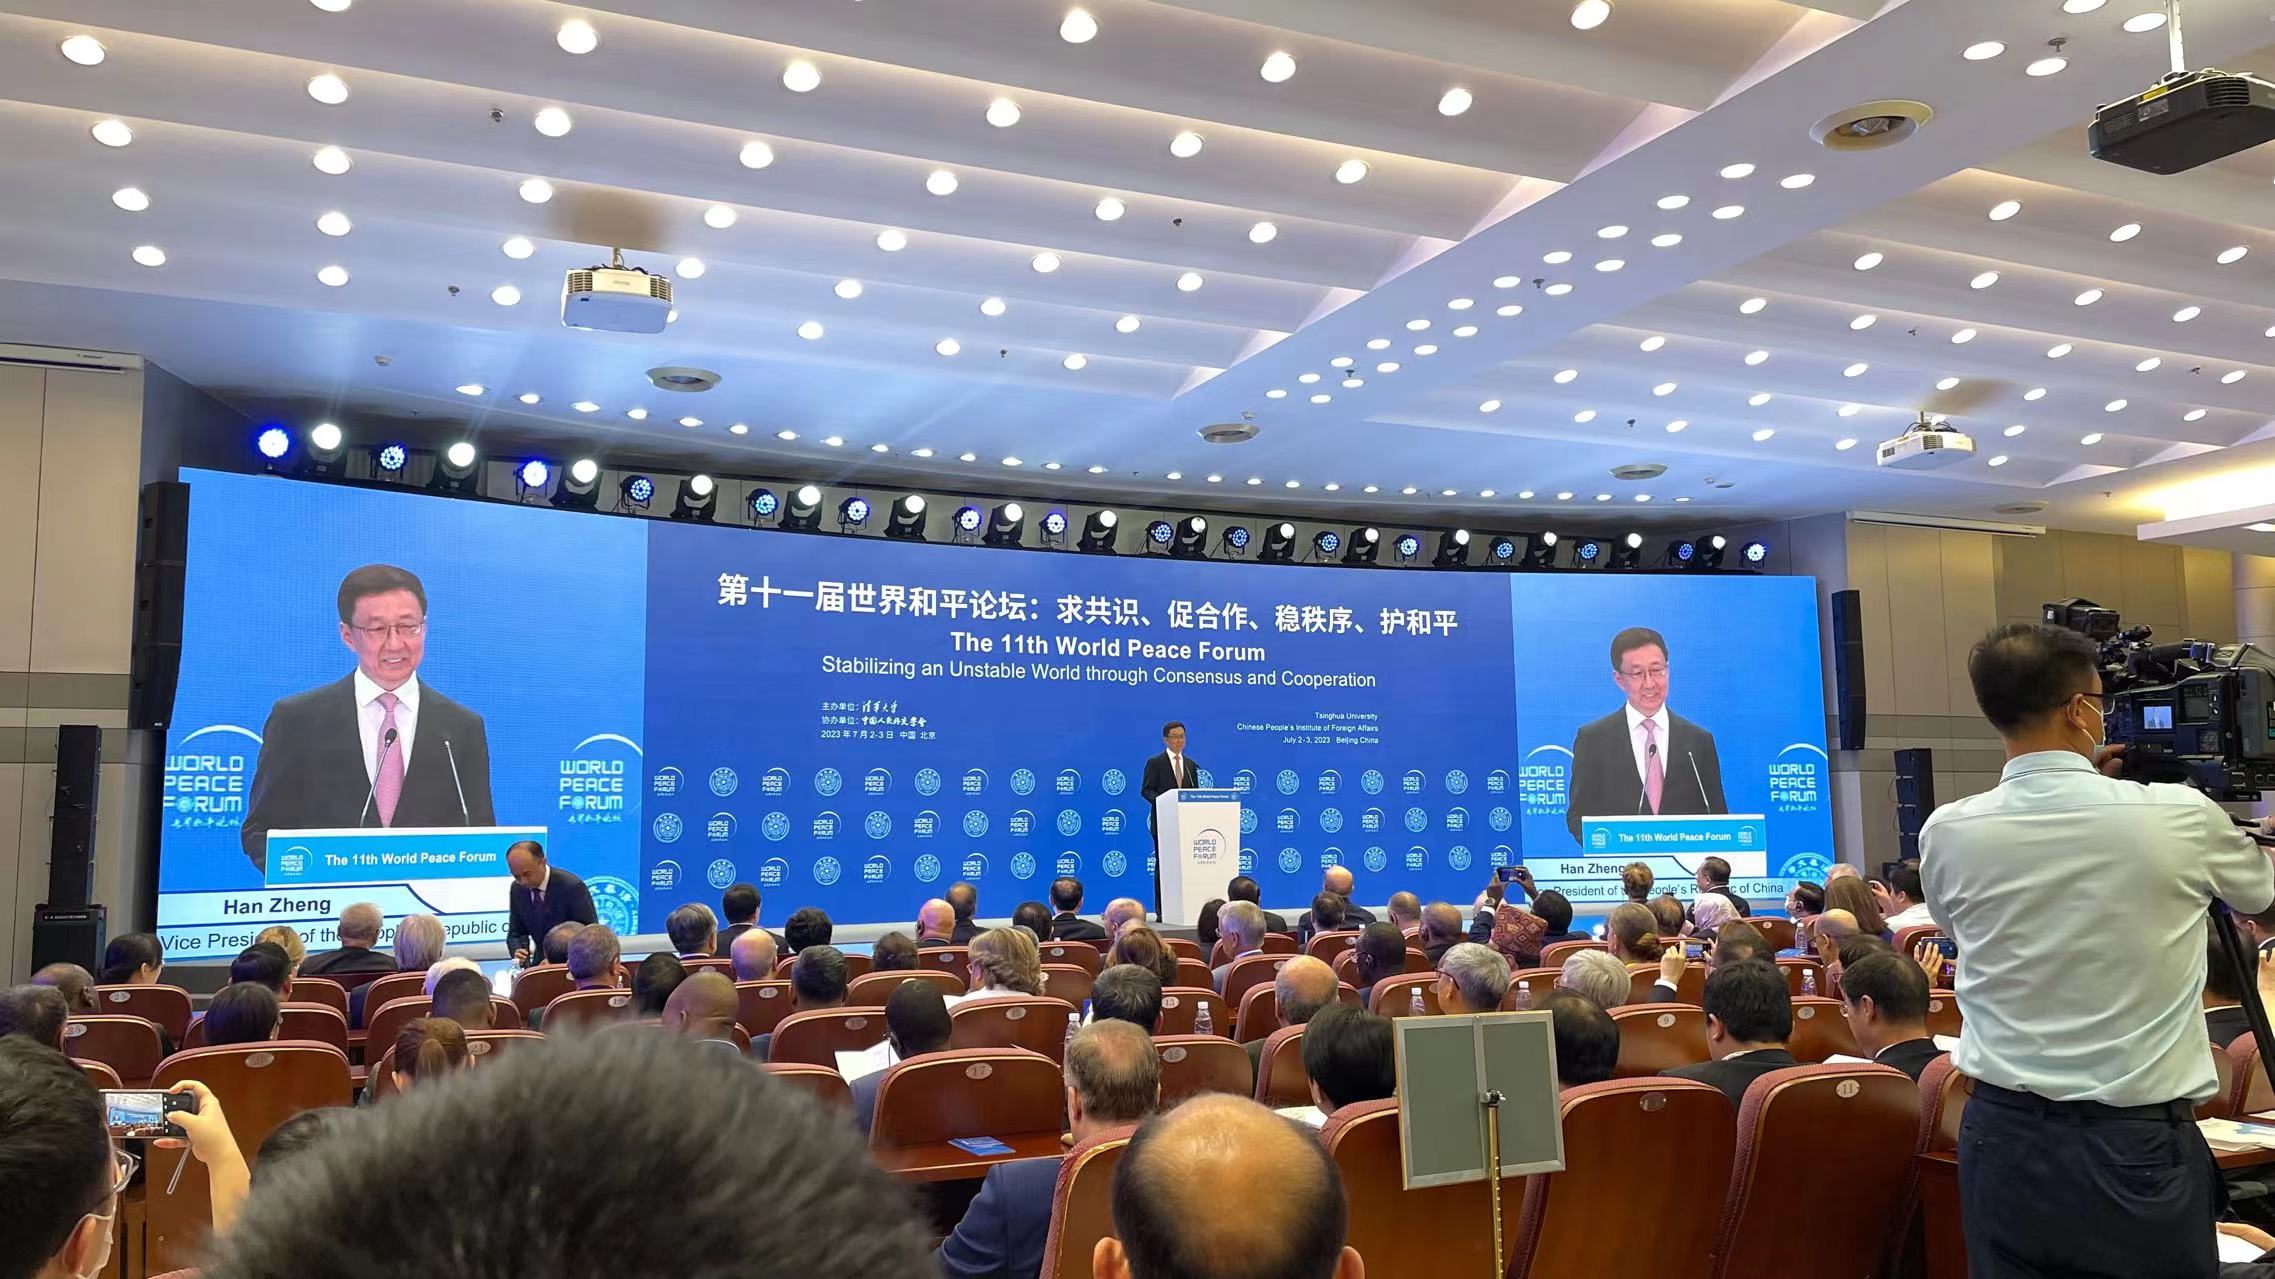 China unswervingly advocates, builds, upholds world peace: Han Zheng